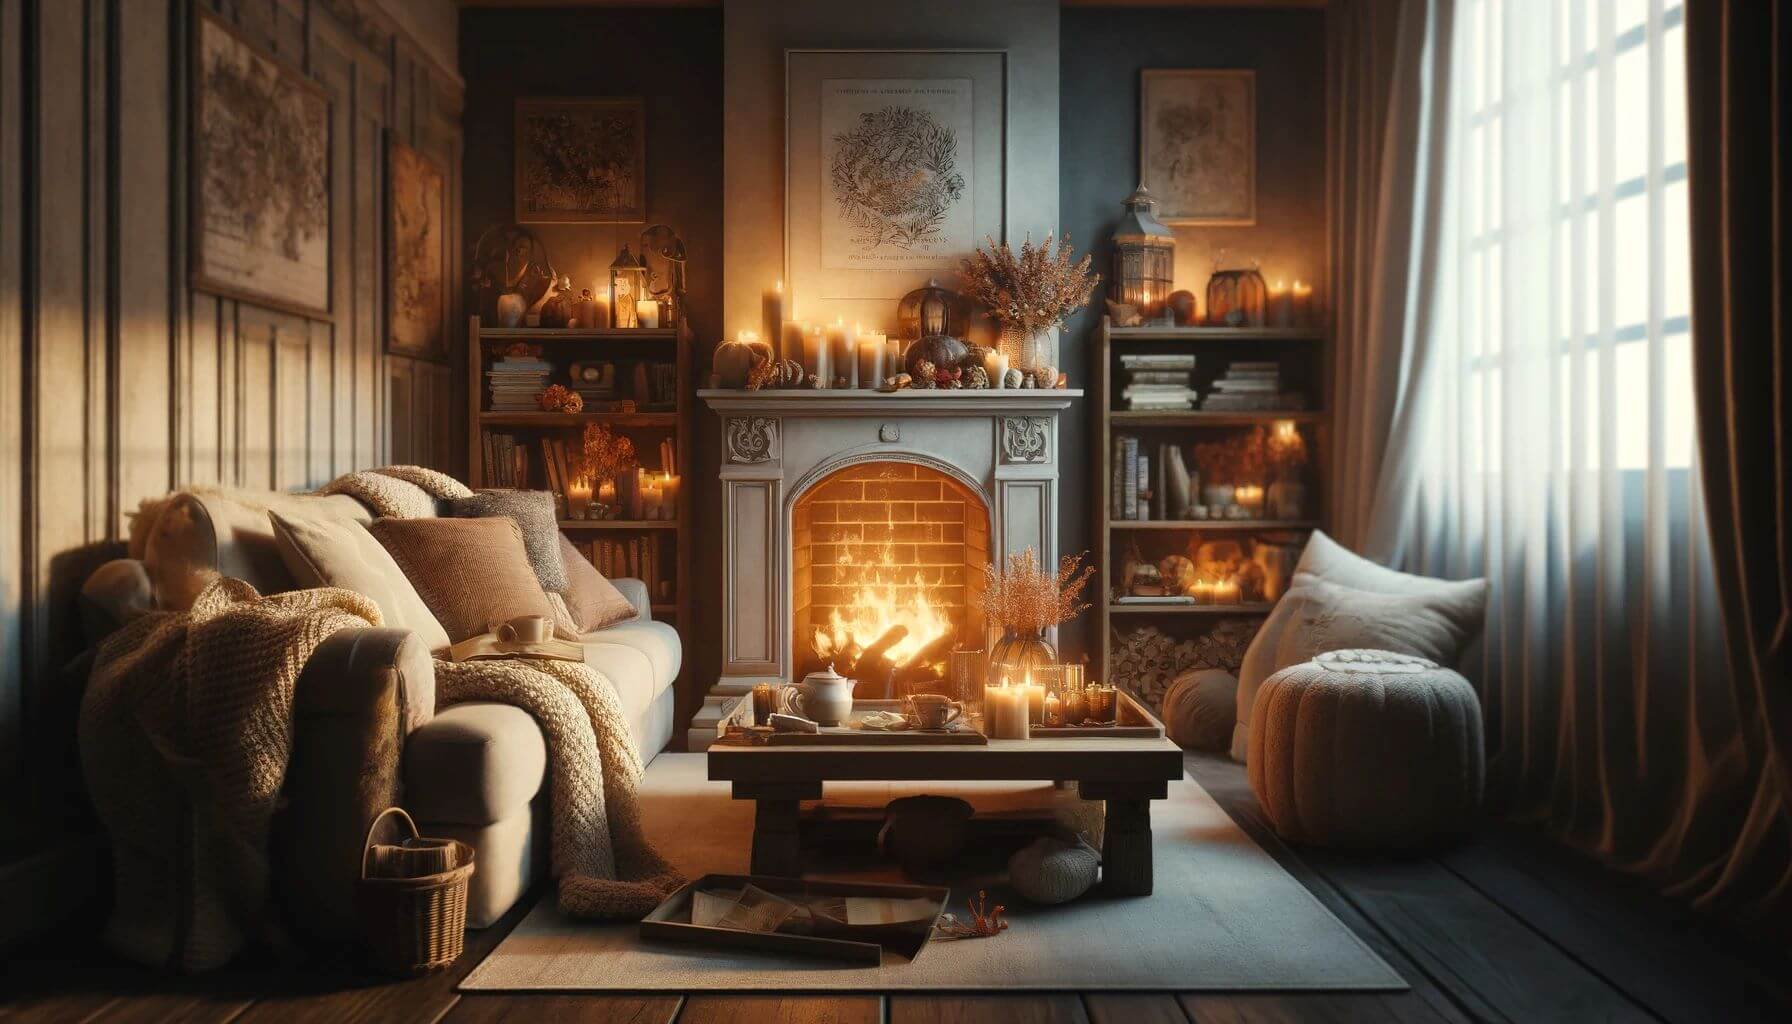 How To Create Cozy Fireplace Decor for Chilly Evenings 25 ideas